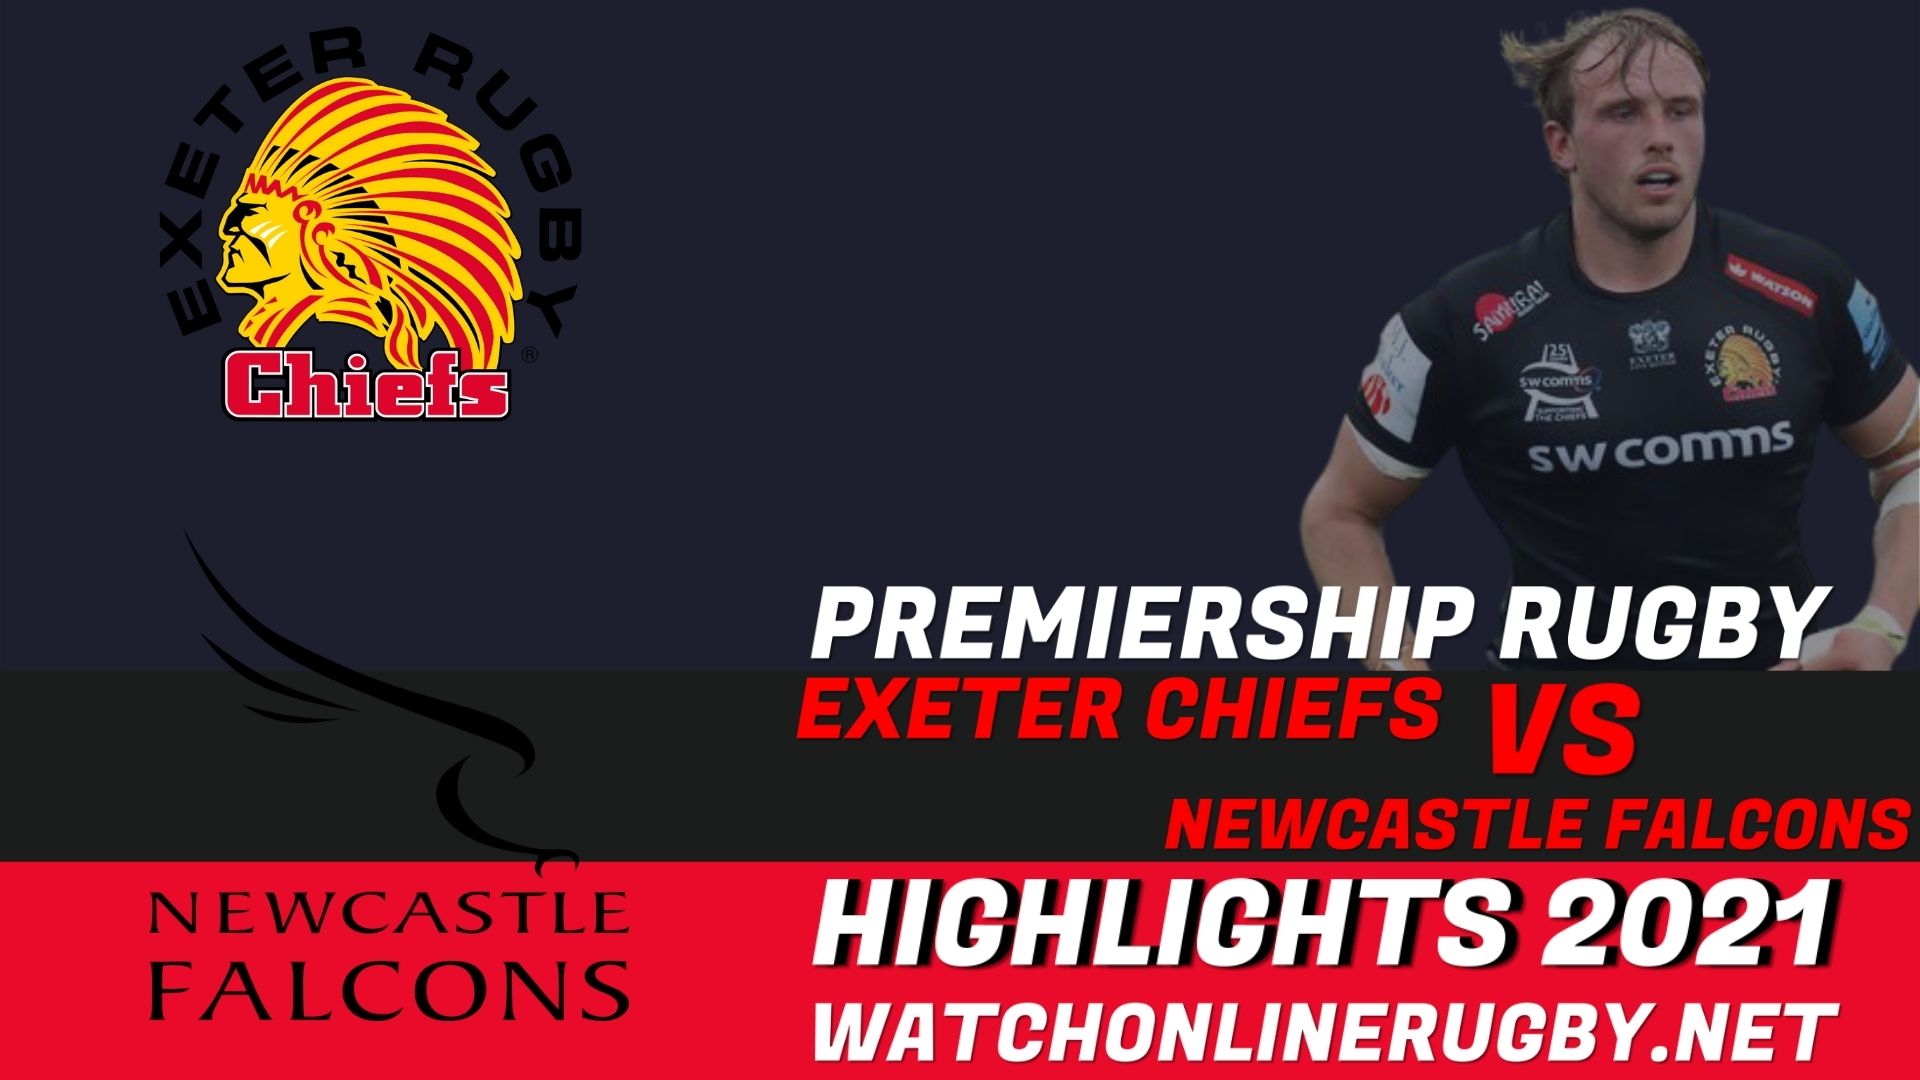 Exeter Chiefs Vs Newcastle Falcons Premiership Rugby 2021 RD 8